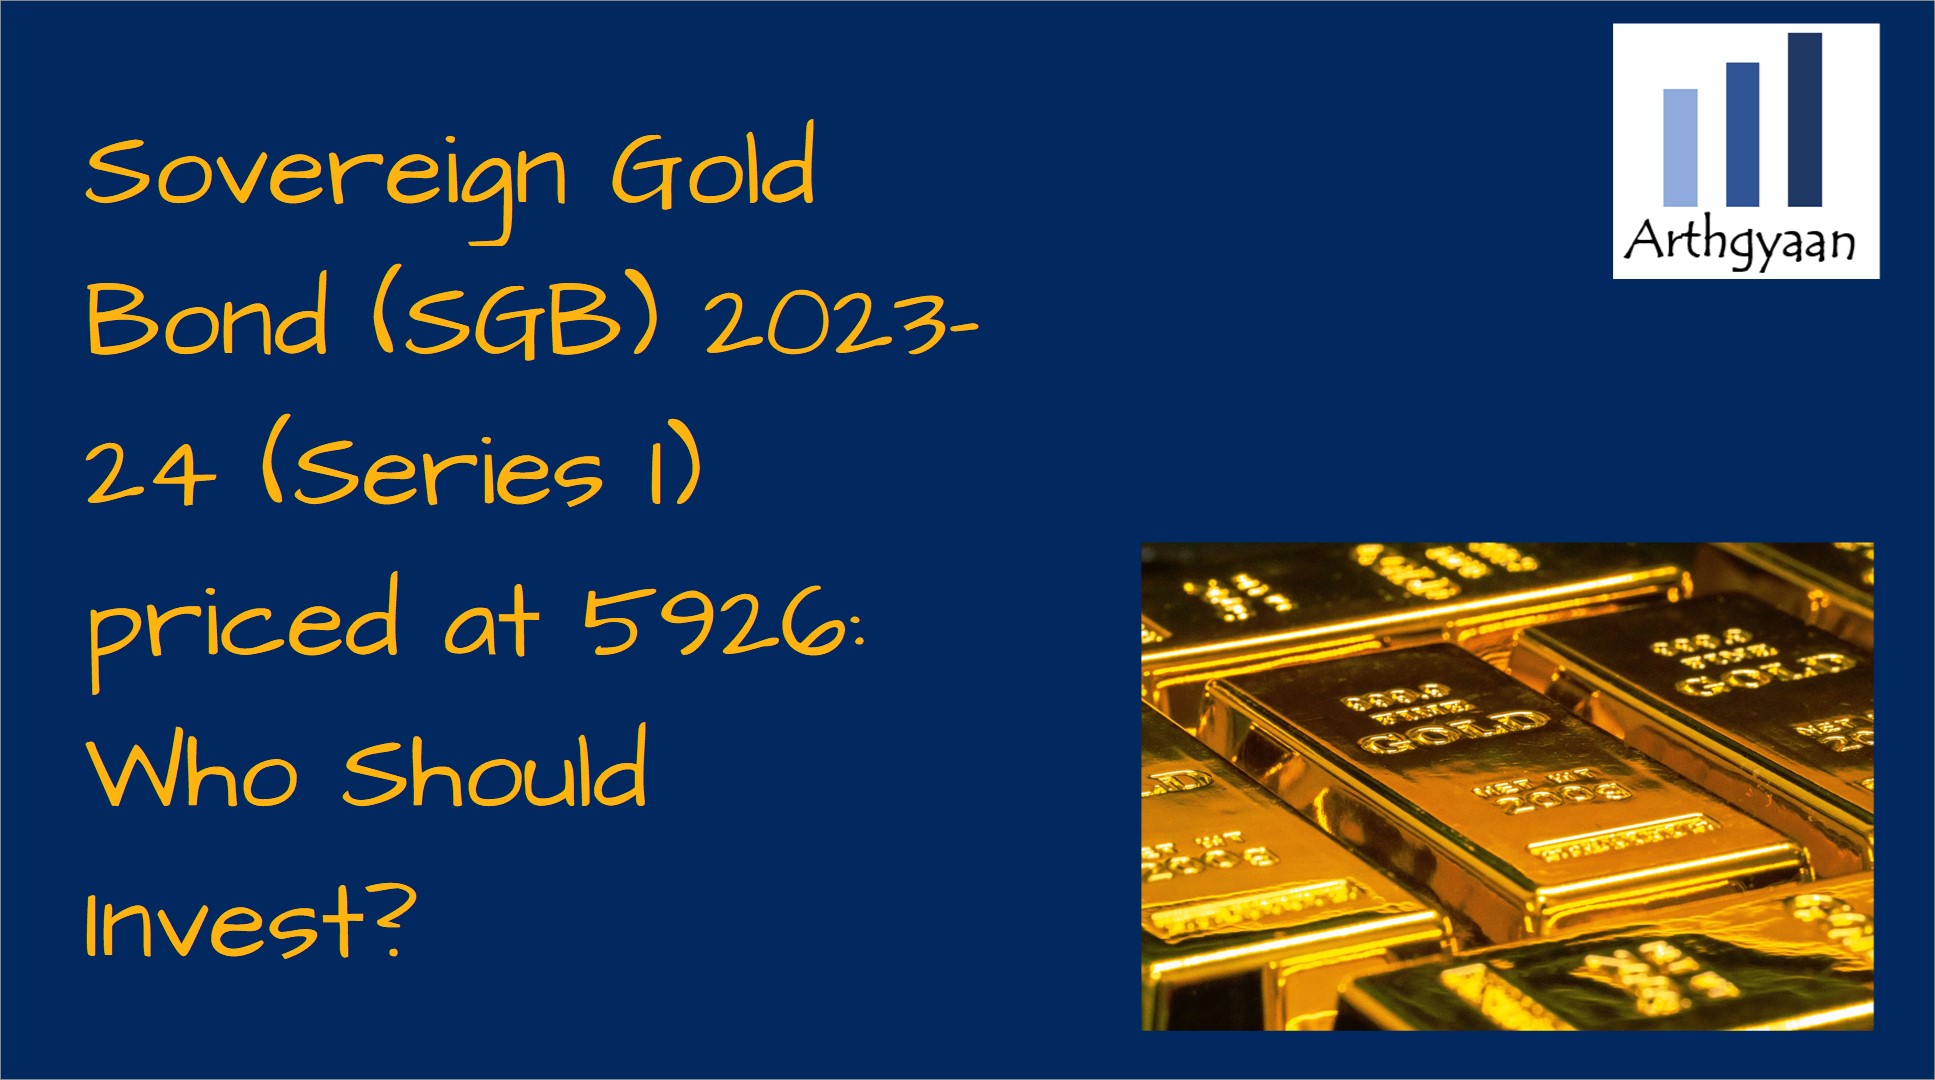 Sovereign Gold Bond (SGB) 2023-24 (Series I) priced at 5926: Who Should Invest?